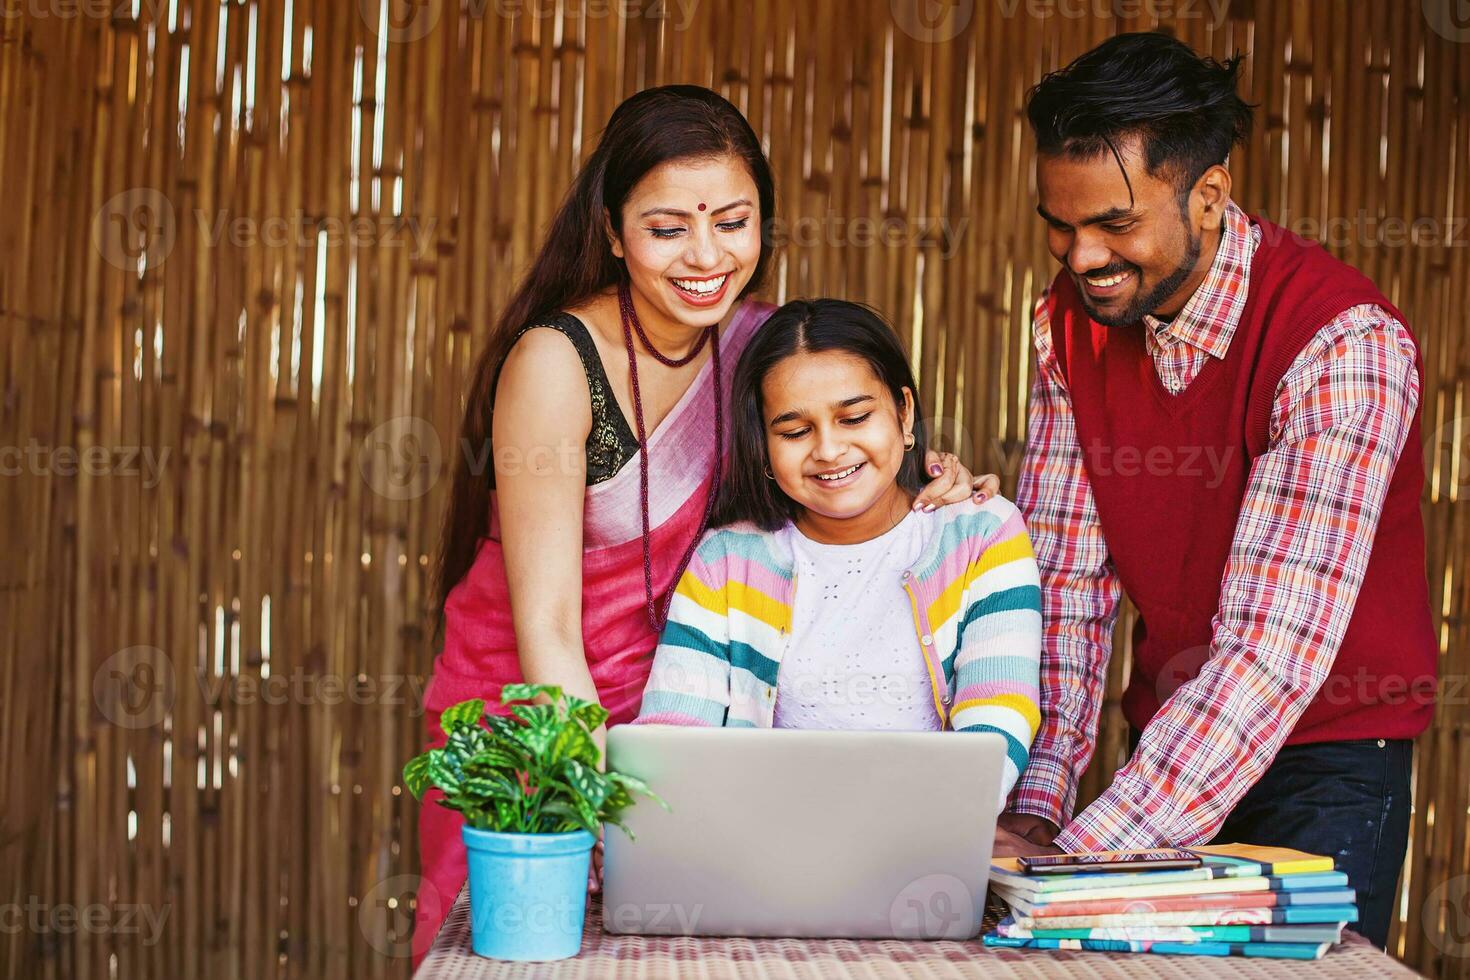 Beautiful traditional Indian family happily using laptop to check the exam marks of their cheerful little daughter photo